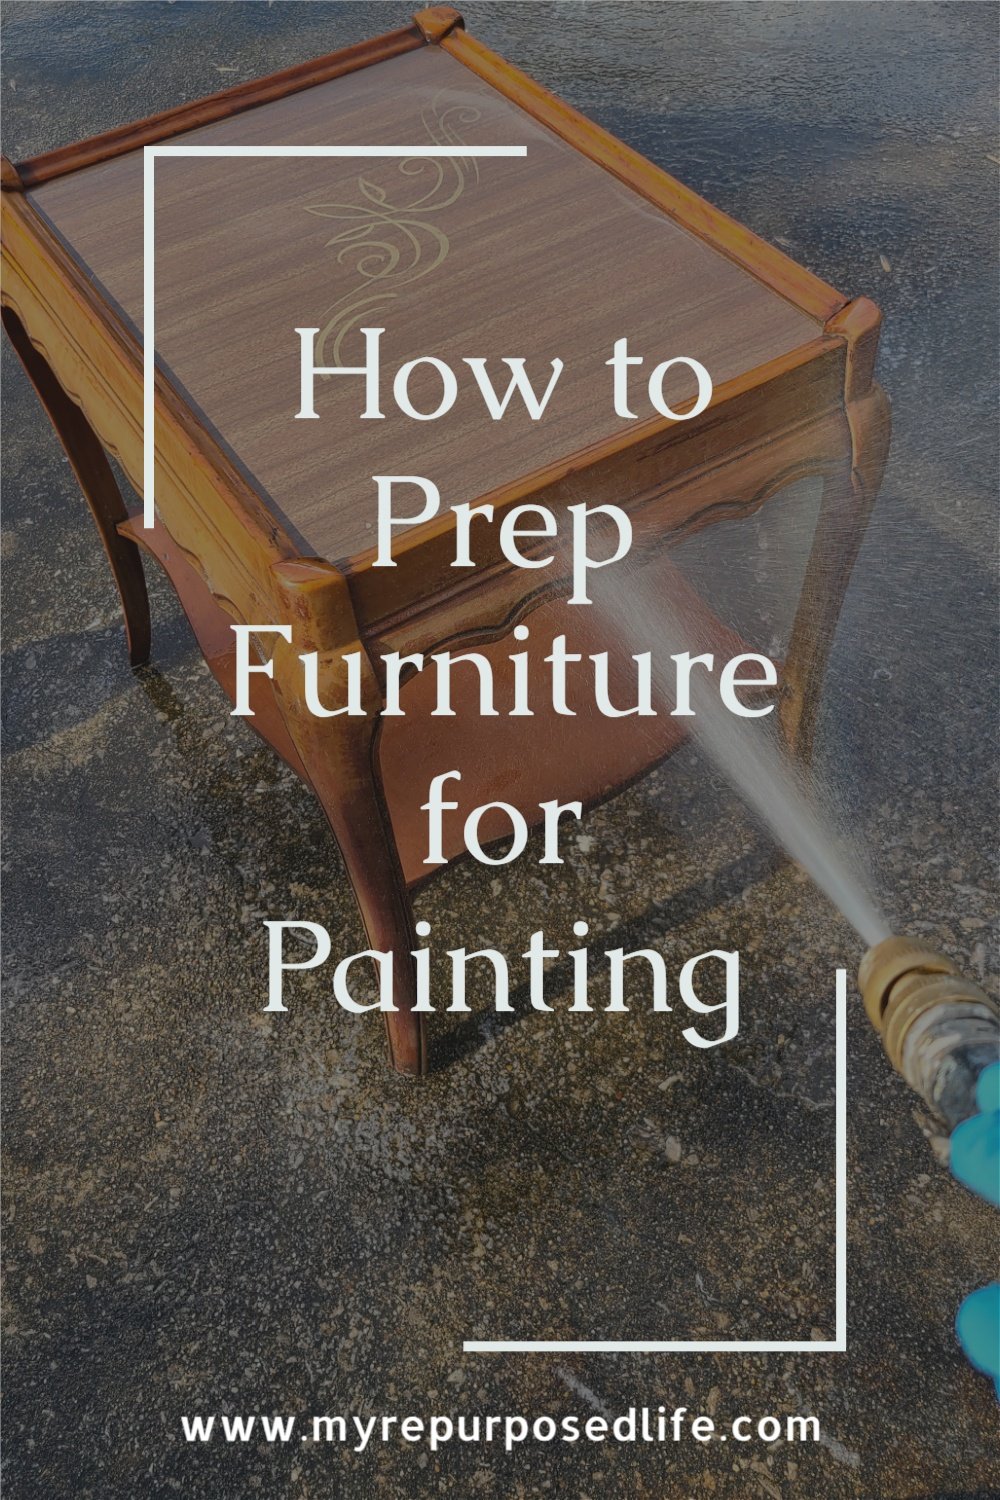 How to prep furniture for painting. Whether you're flipping furniture for a biz, or just updating Grandma's old table, don't skip this step. #MyRepurposedLife #repurposed #furniture #painting #makeover #nicotine via @repurposedlife